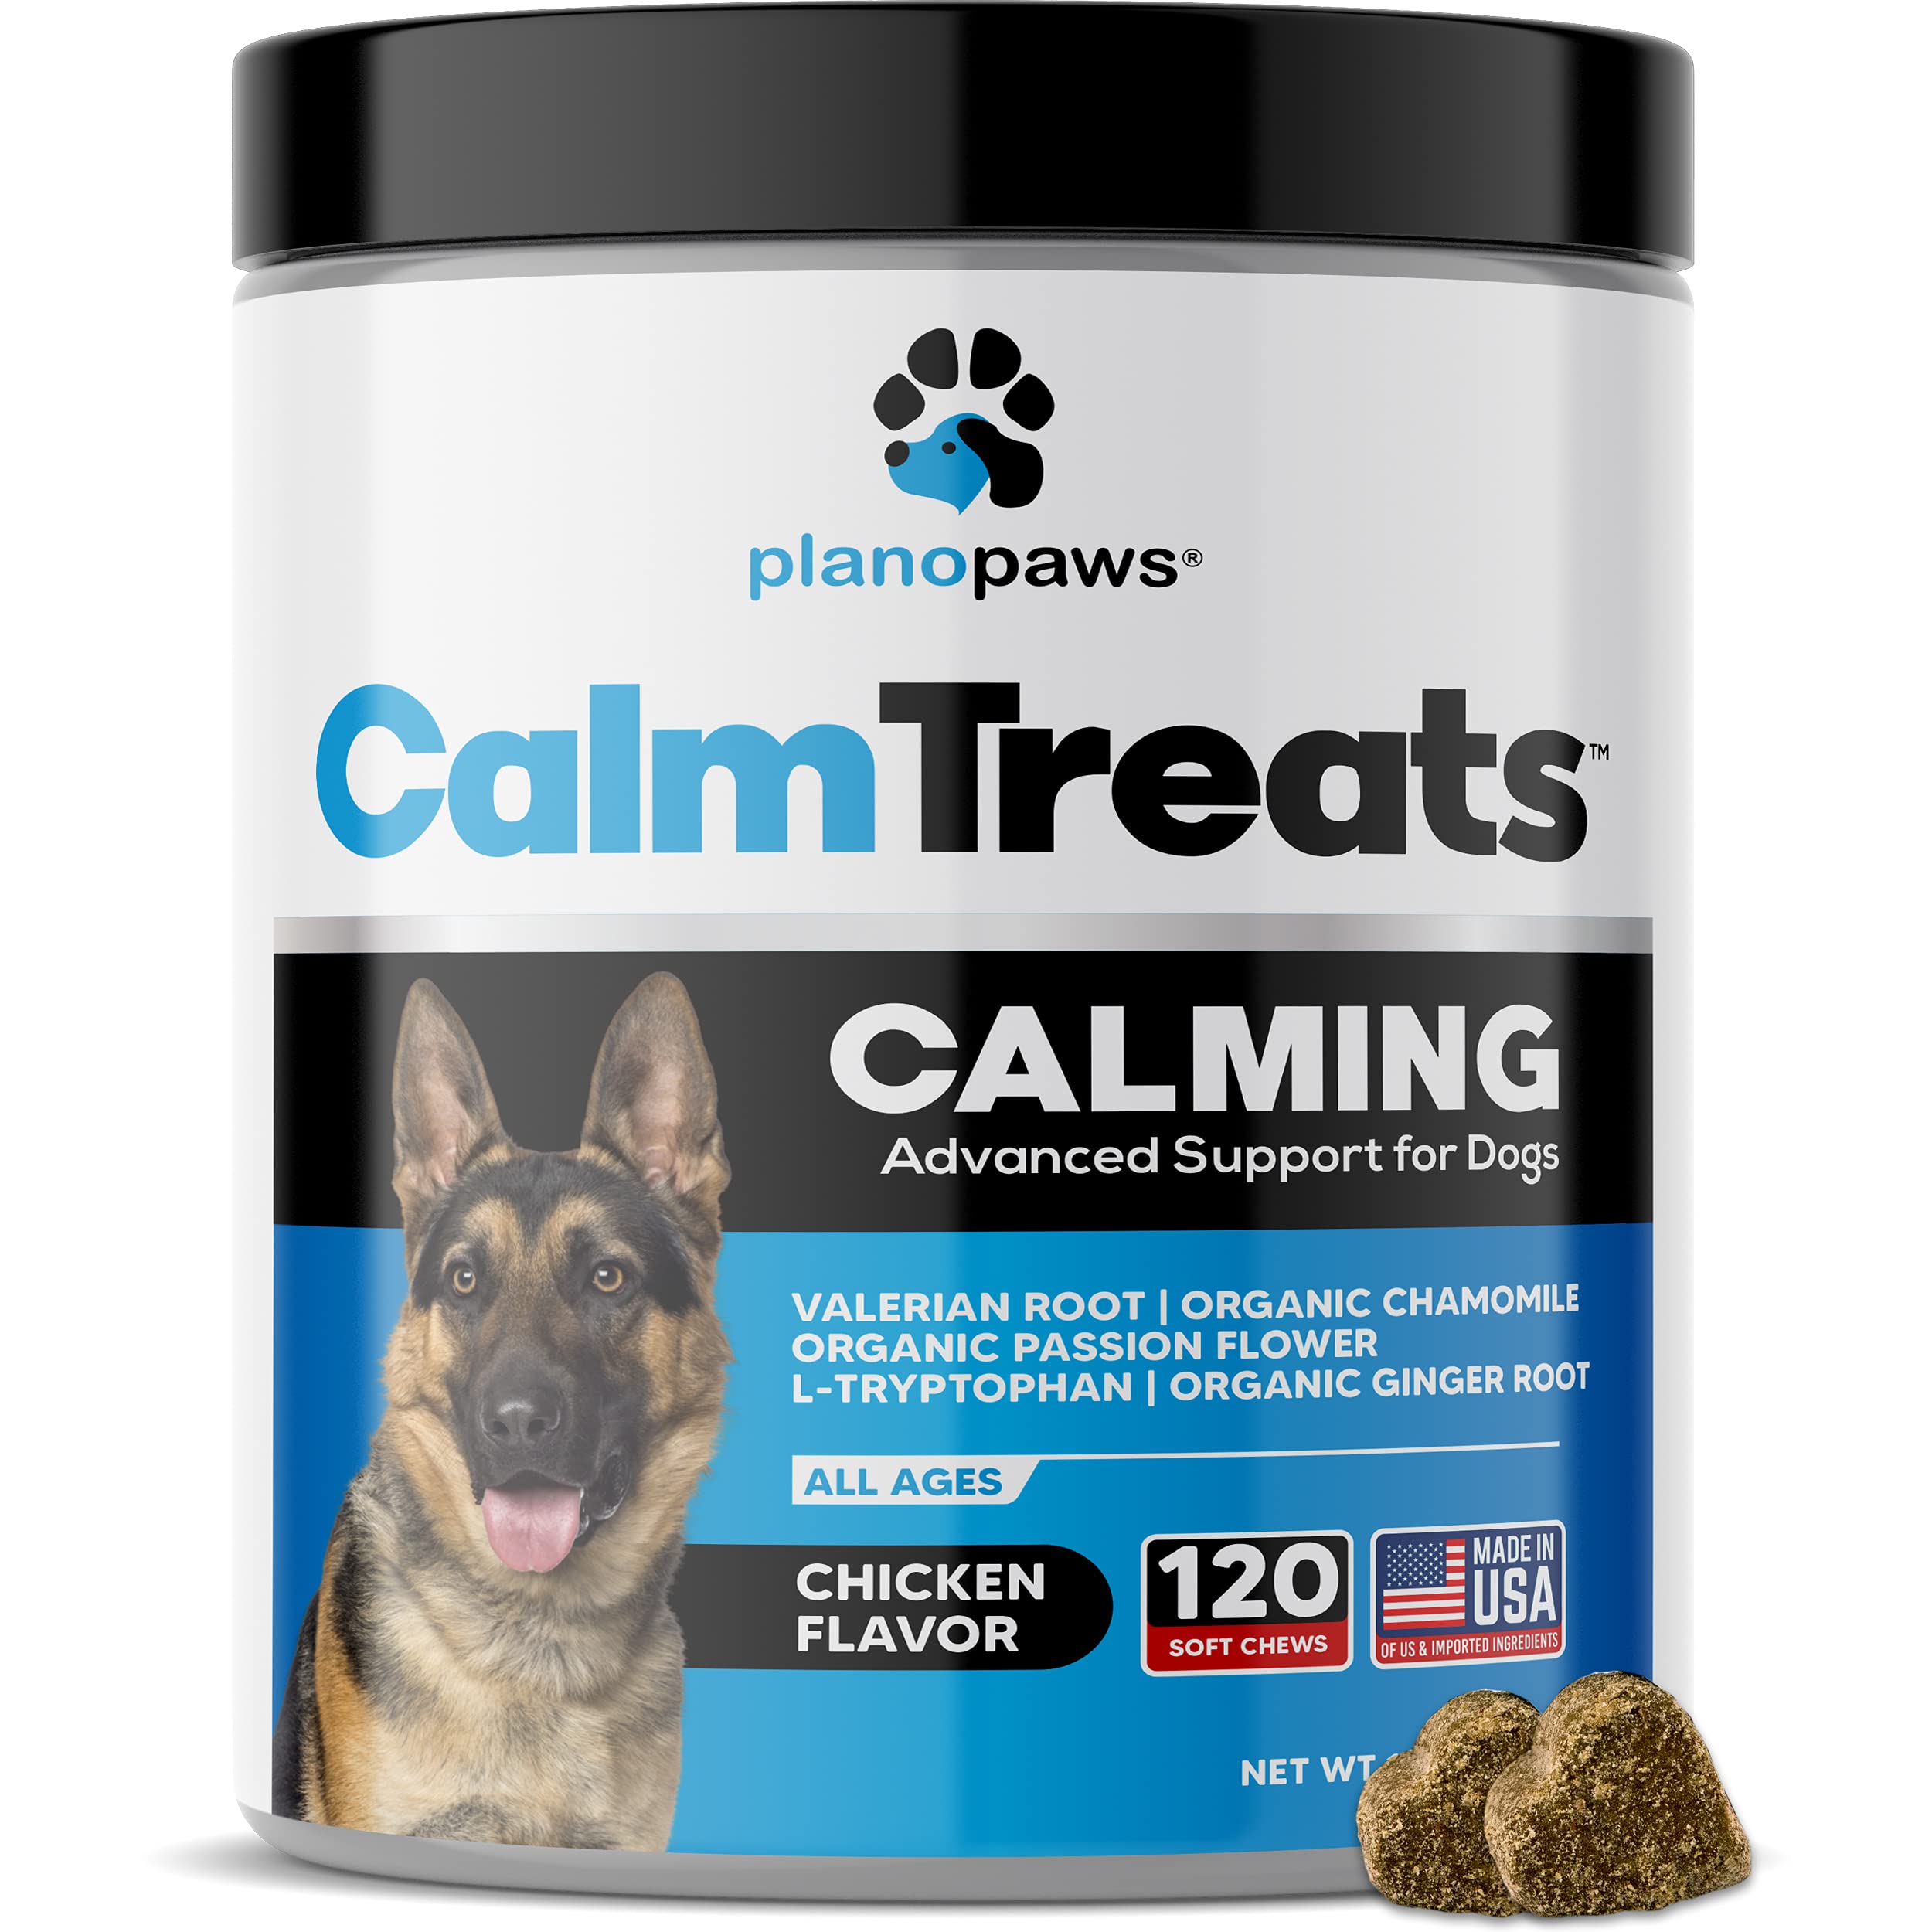 Are Calming Treats Safe for Dogs?